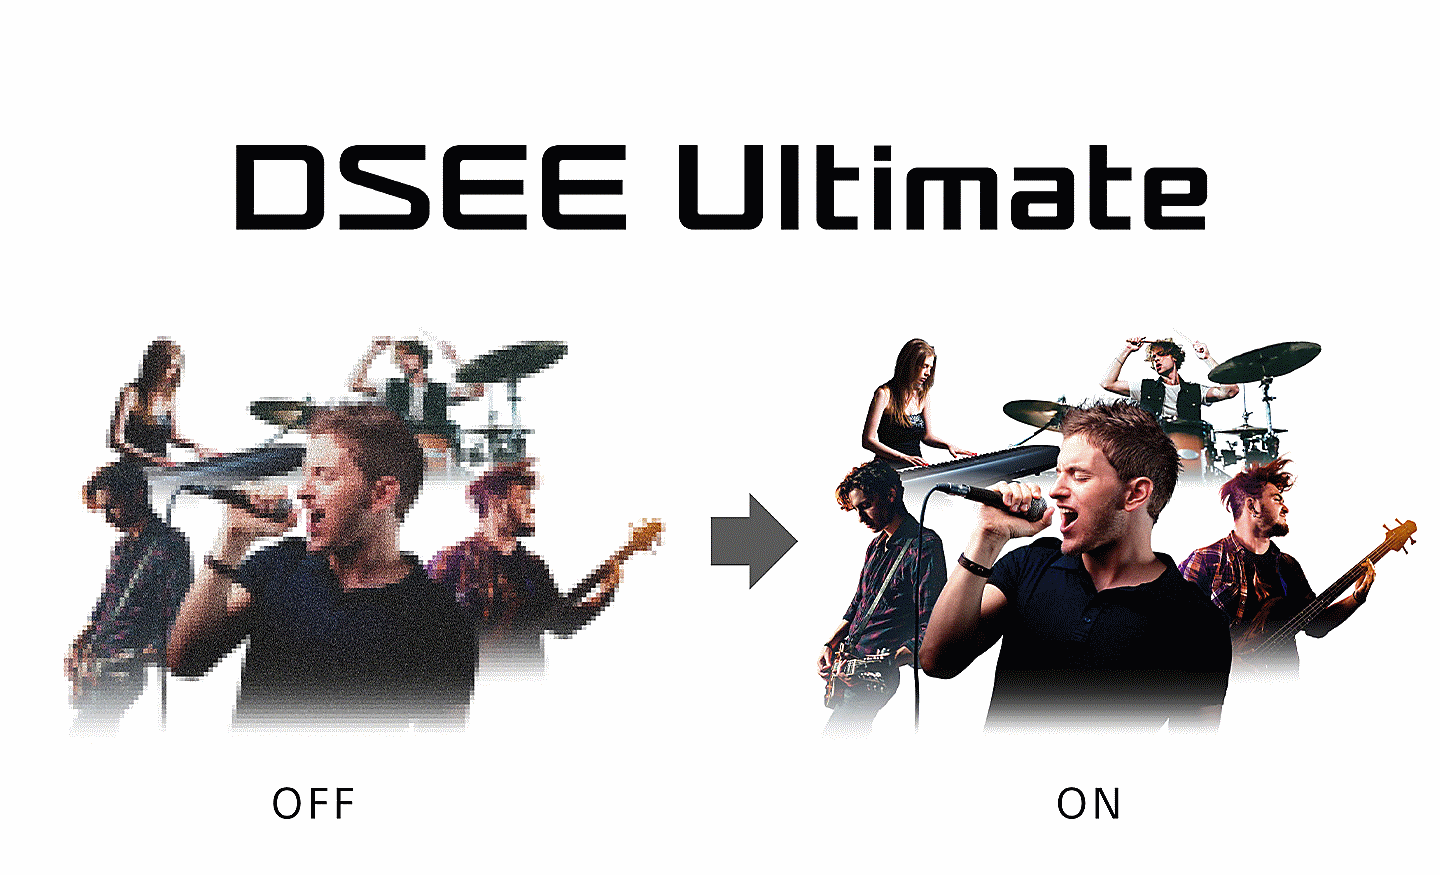 Two identical images of people playing instruments under the text DSEE Ultimate, the left is blurry and the right is clear